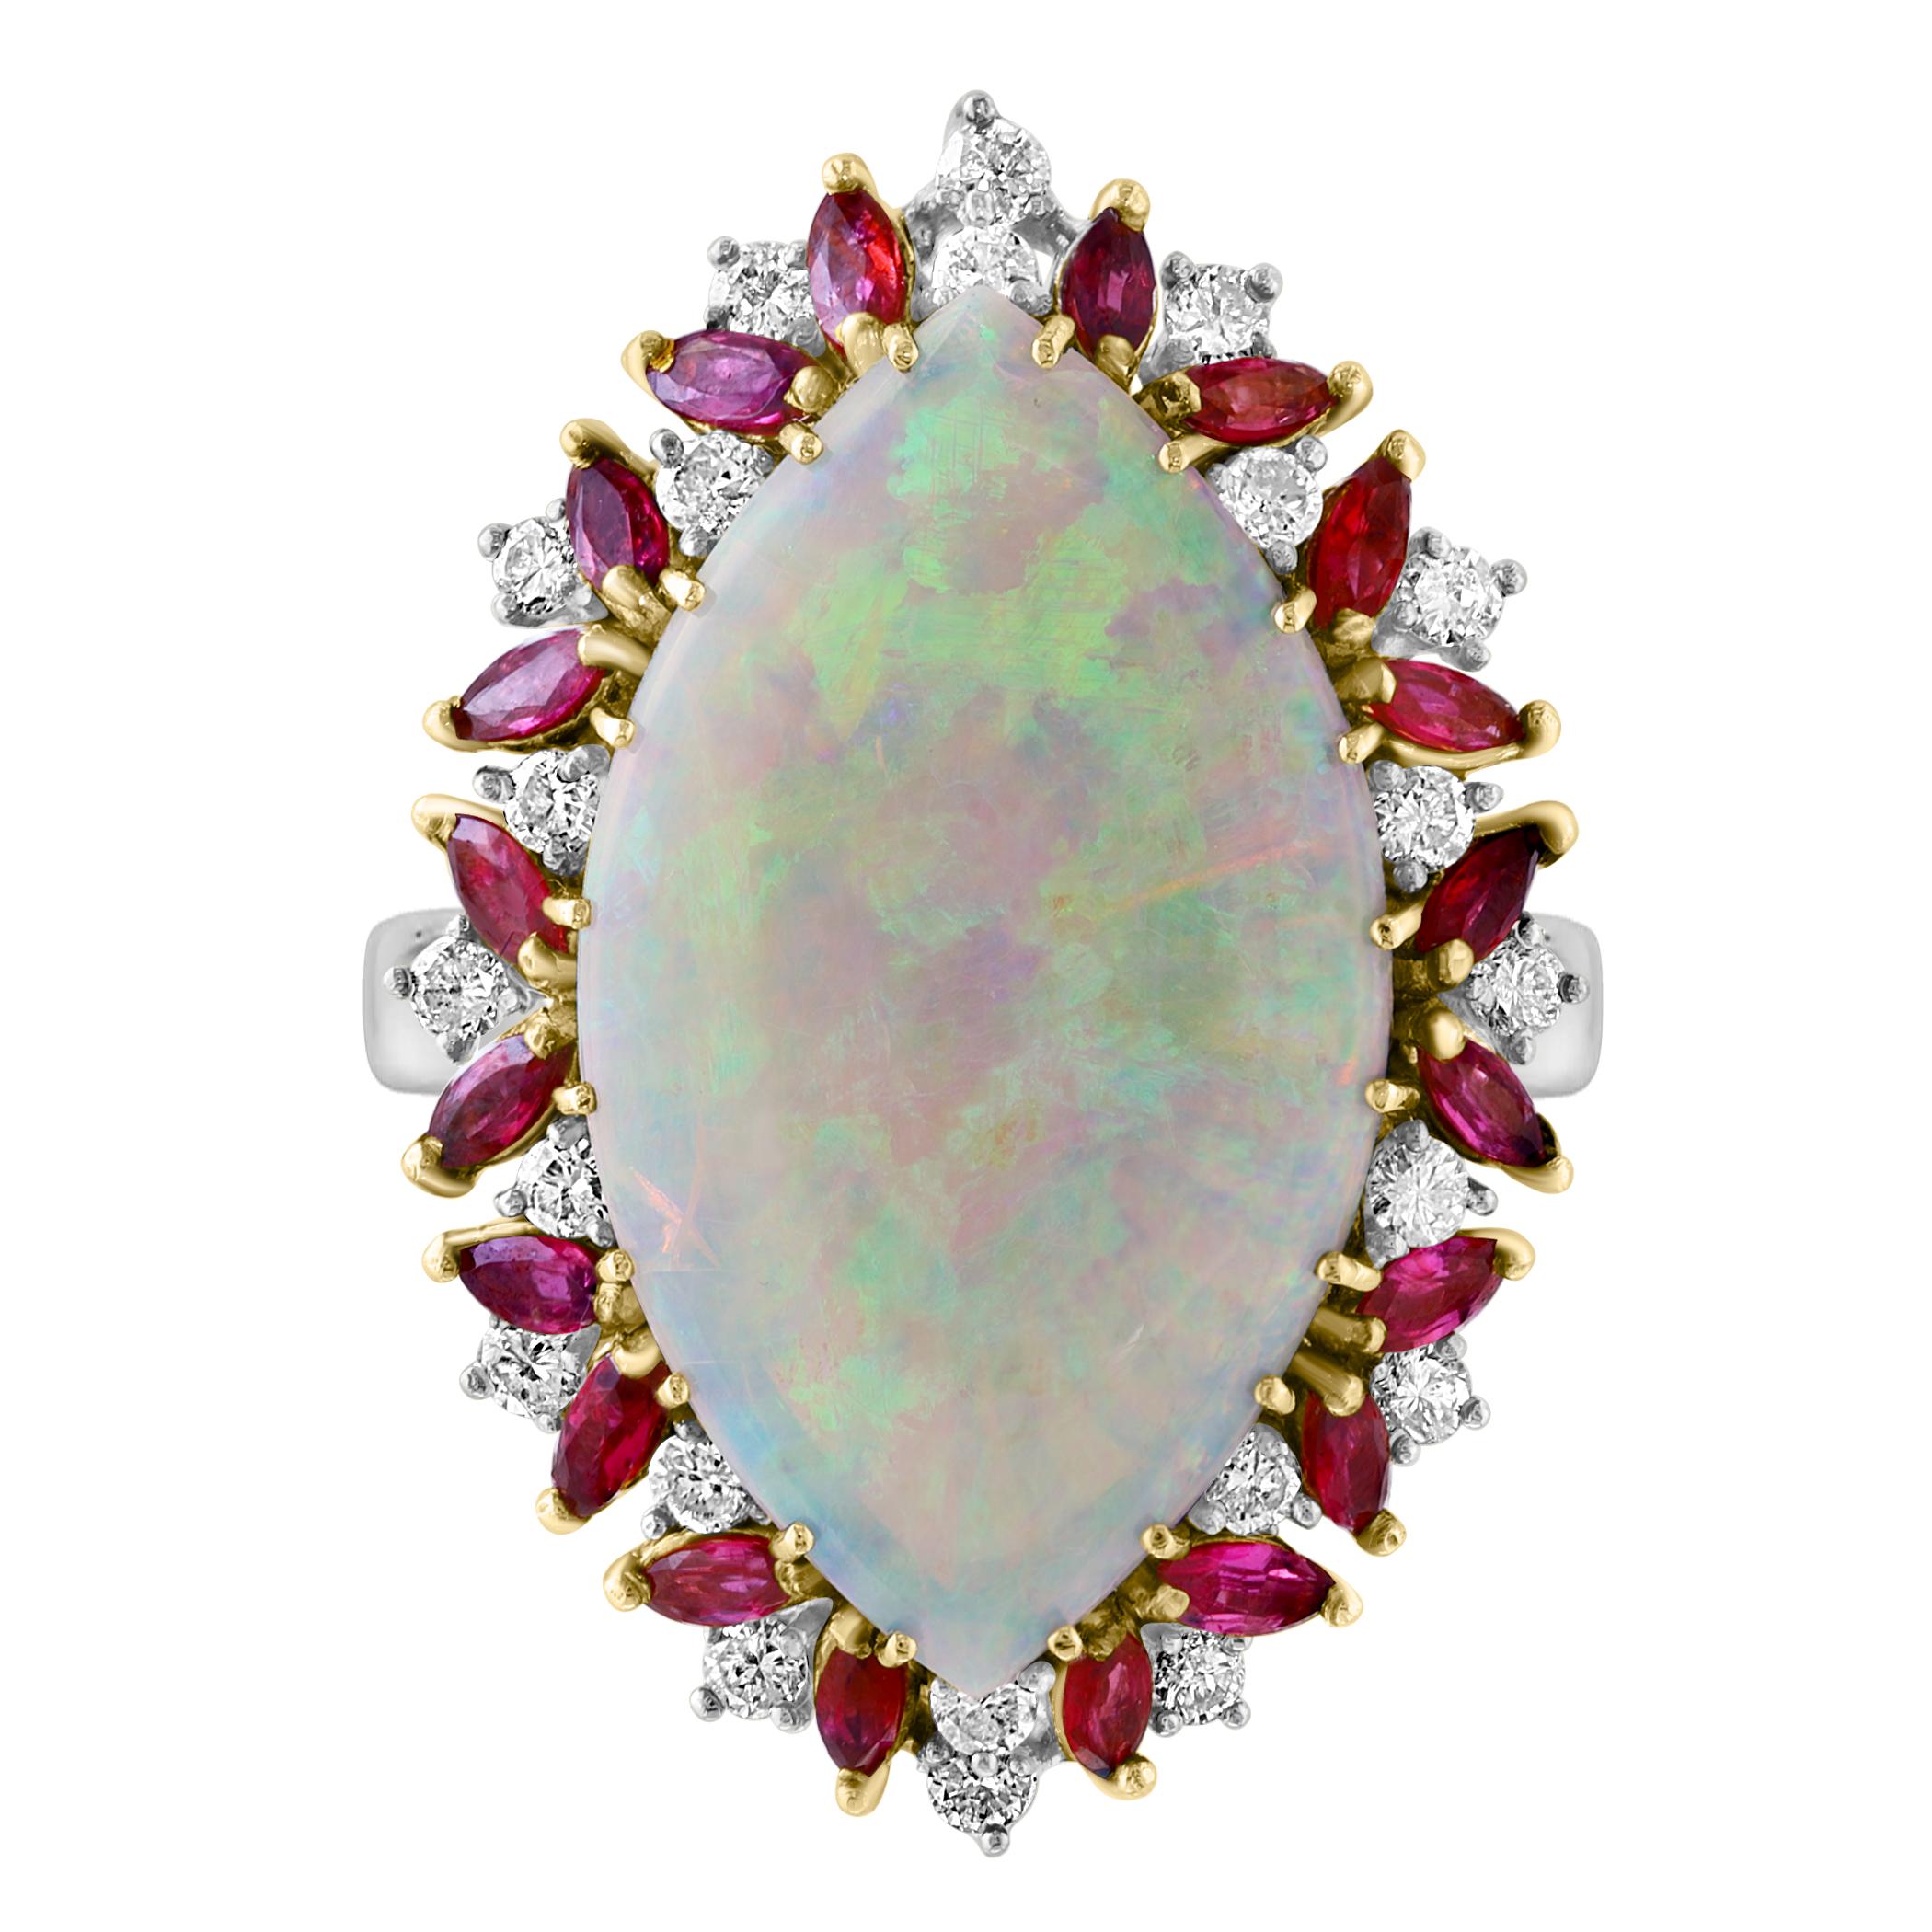 Introducing a timeless cocktail ring featuring a stunning 34.2X19.66X4.25mm Marquise-shaped opal and diamond. This ring showcases a natural opal with mesmerizing colors, exhibiting excellent quality and clarity. The opal's sizable Marquise shape